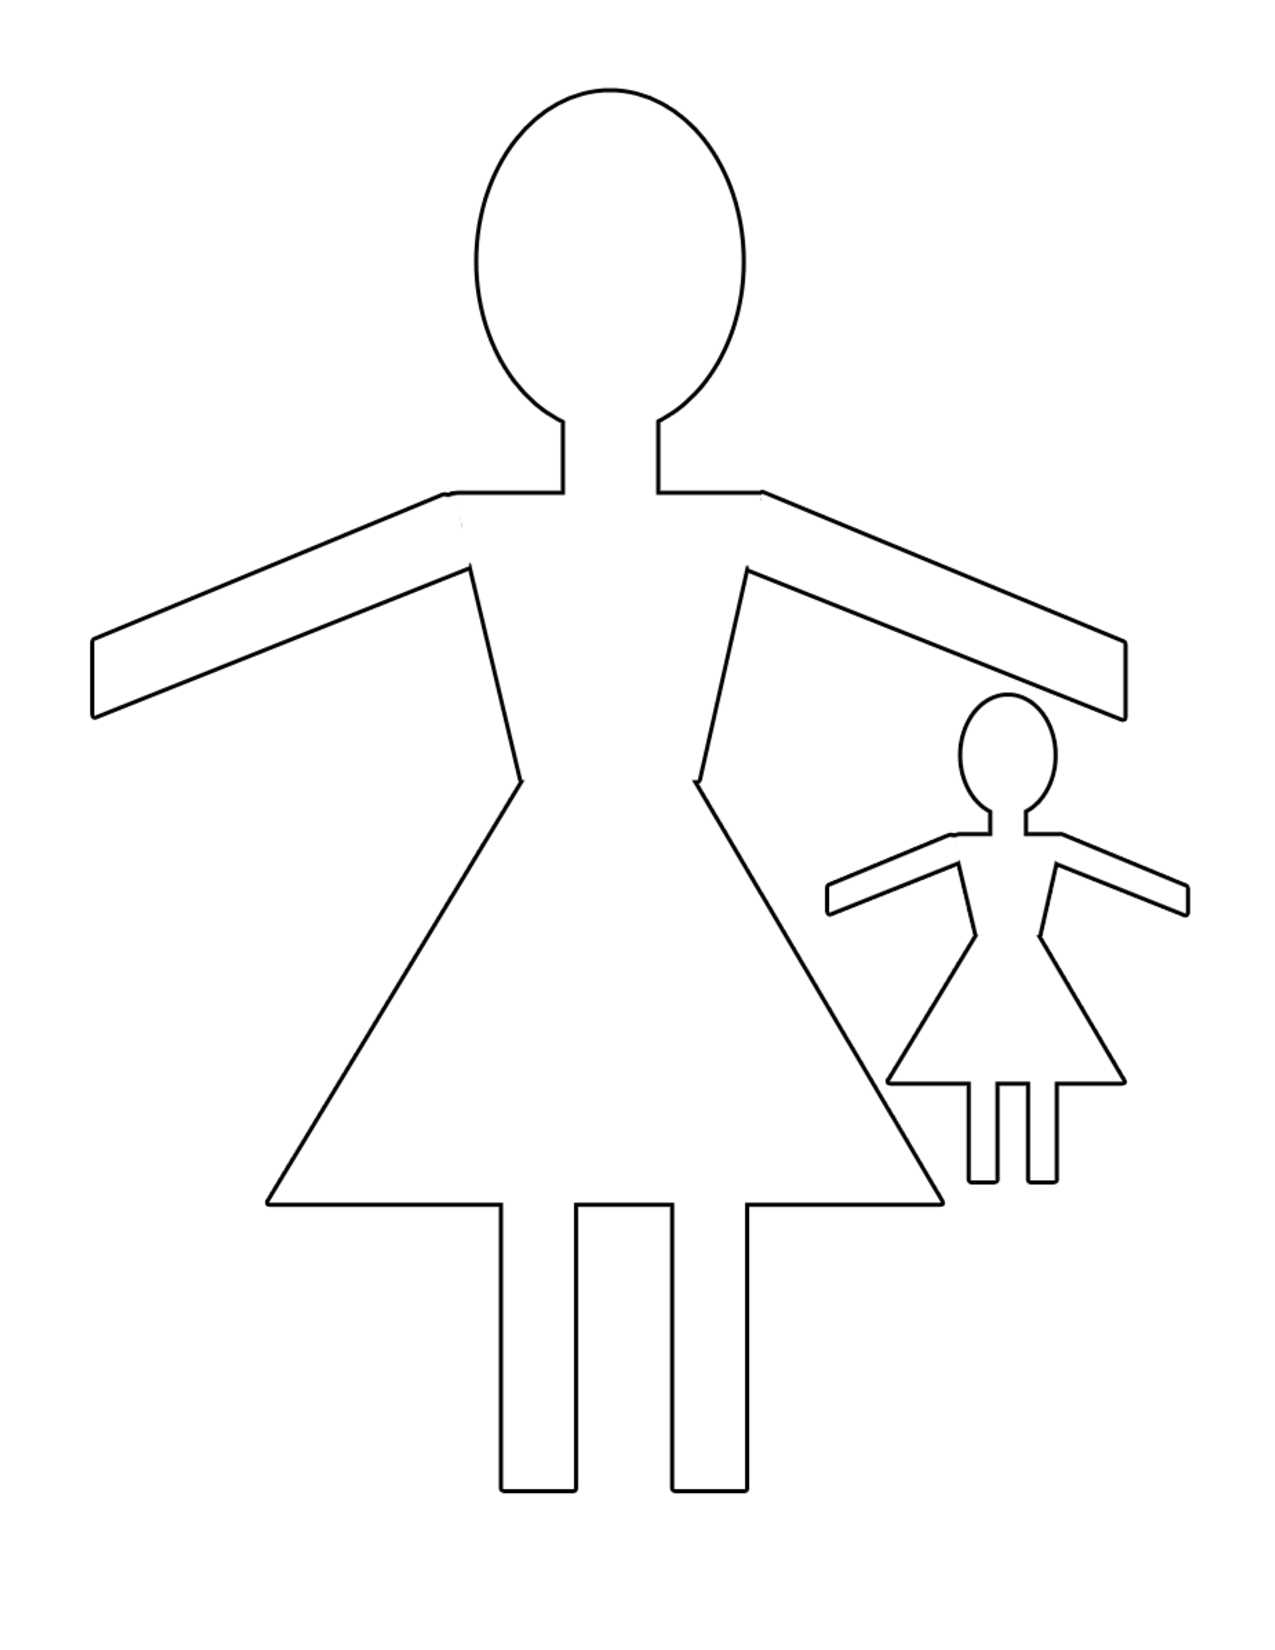 7 Best Images Of Printable Paper Doll Templates Printable Girl Paper